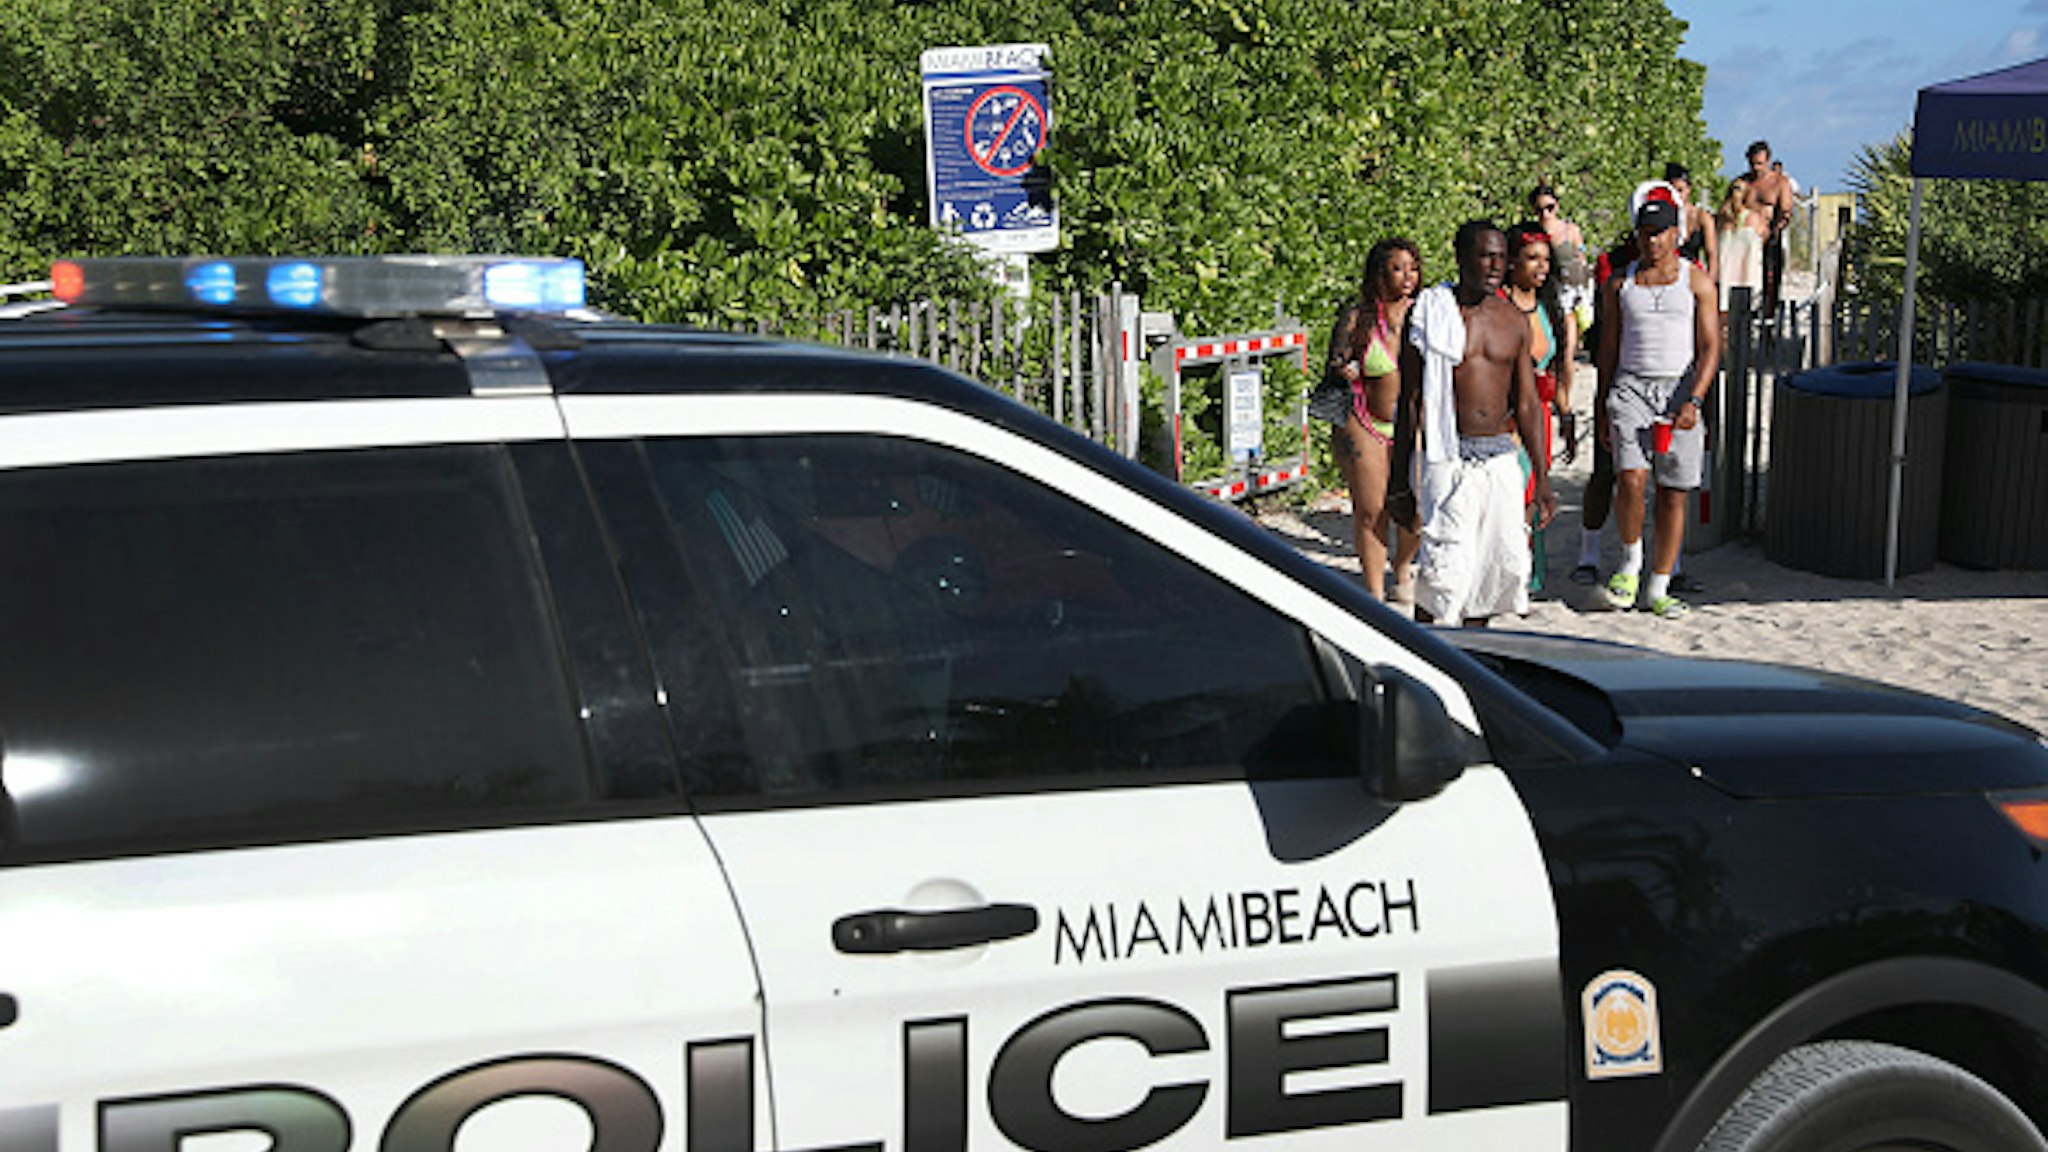 MIAMI BEACH, FLORIDA - MARCH 15: Beach goers walk past a police car as they exit from South Beach as the city closes it after 5pm in an effort to prevent the spread of the coronavirus on March 15, 2020 in Miami Beach, Florida. Miami Beach city officials temporarily closed the beach popular with college spring breakers and asked them to refrain from large gatherings where COVID-19 could spread.